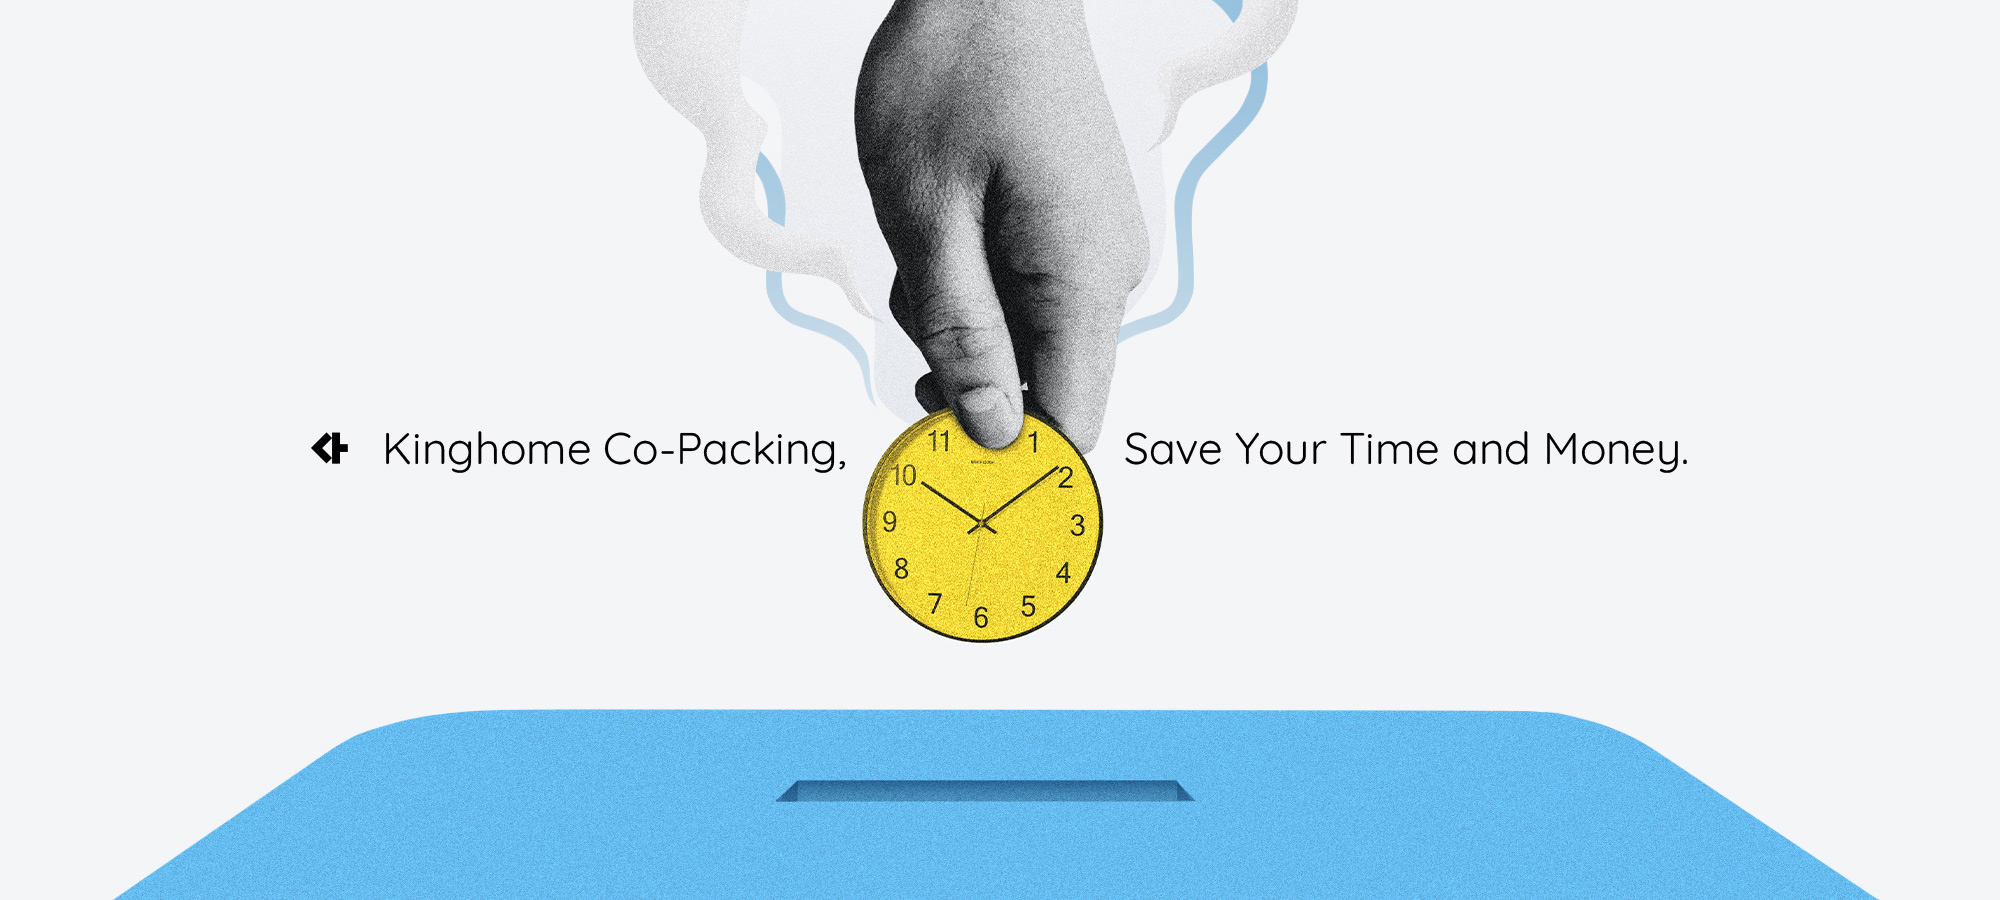 Kinghome co-packing services can save your time and money